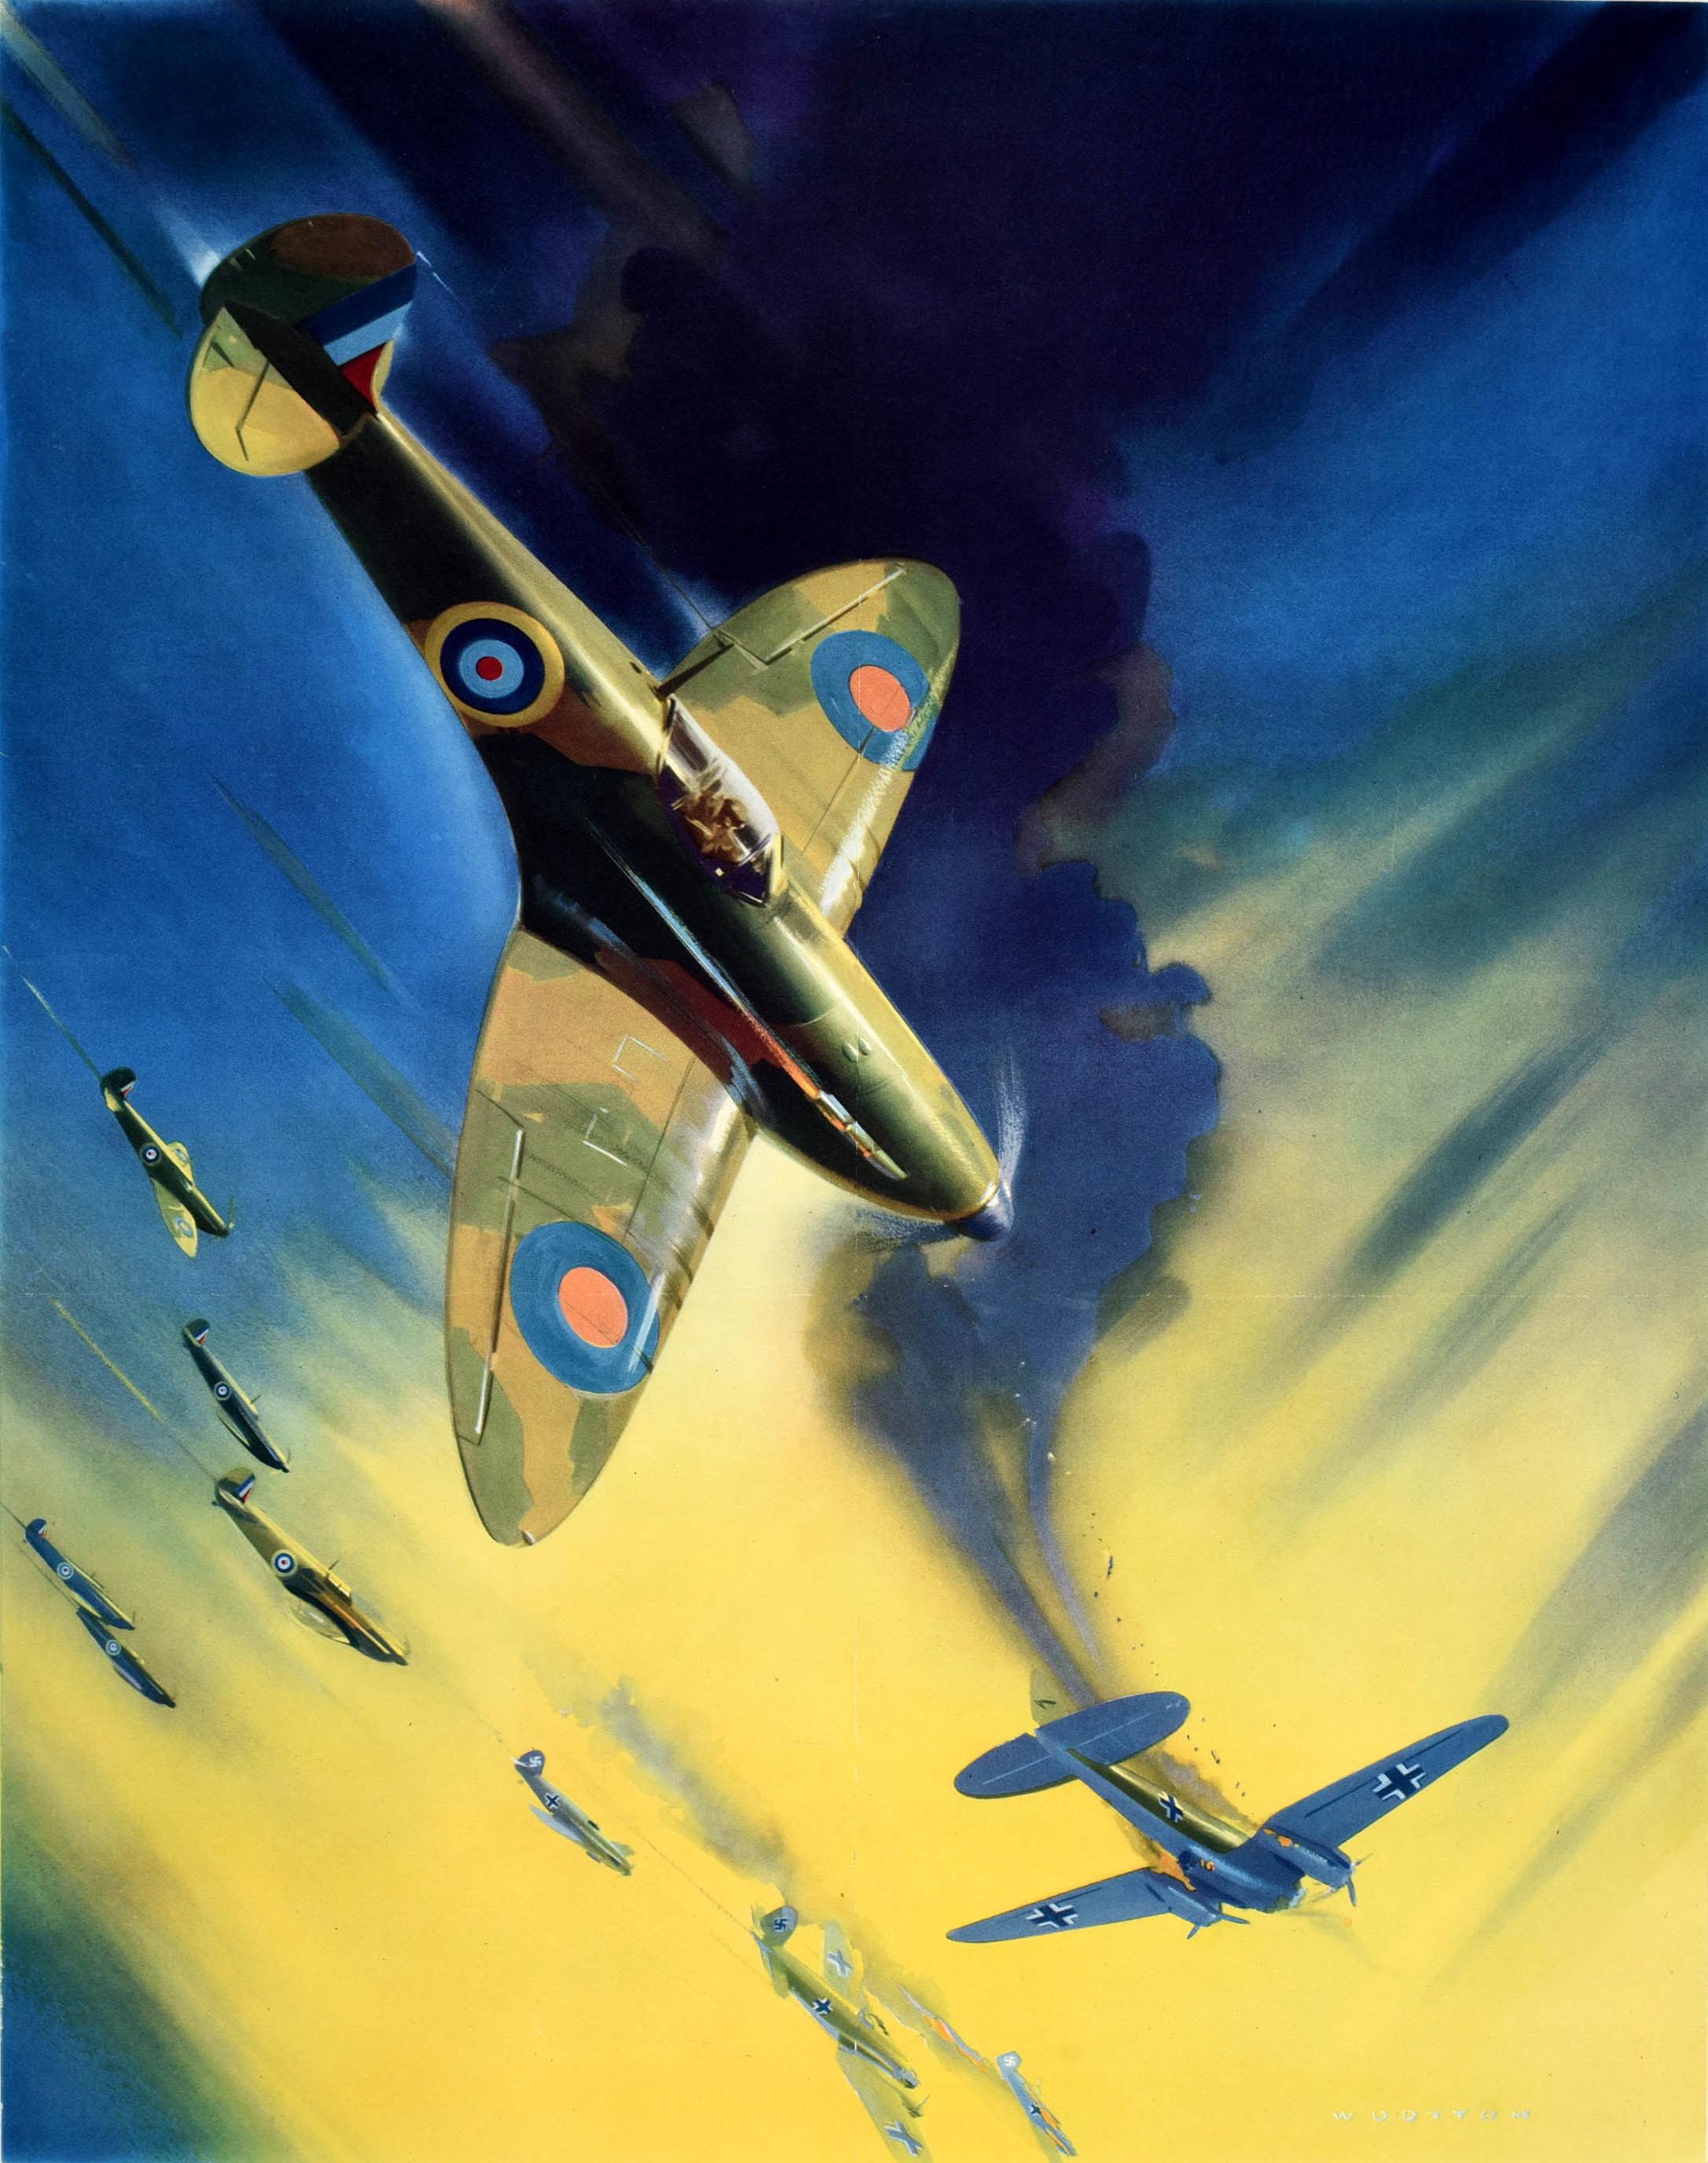 Original vintage World War Two poster - Help Britain Finish the Job! - featuring dynamic artwork by the notable British painter and illustrator Frank Wootton (1911-1998) depicting an aerial battle scene showing British RAF spitfire planes chasing